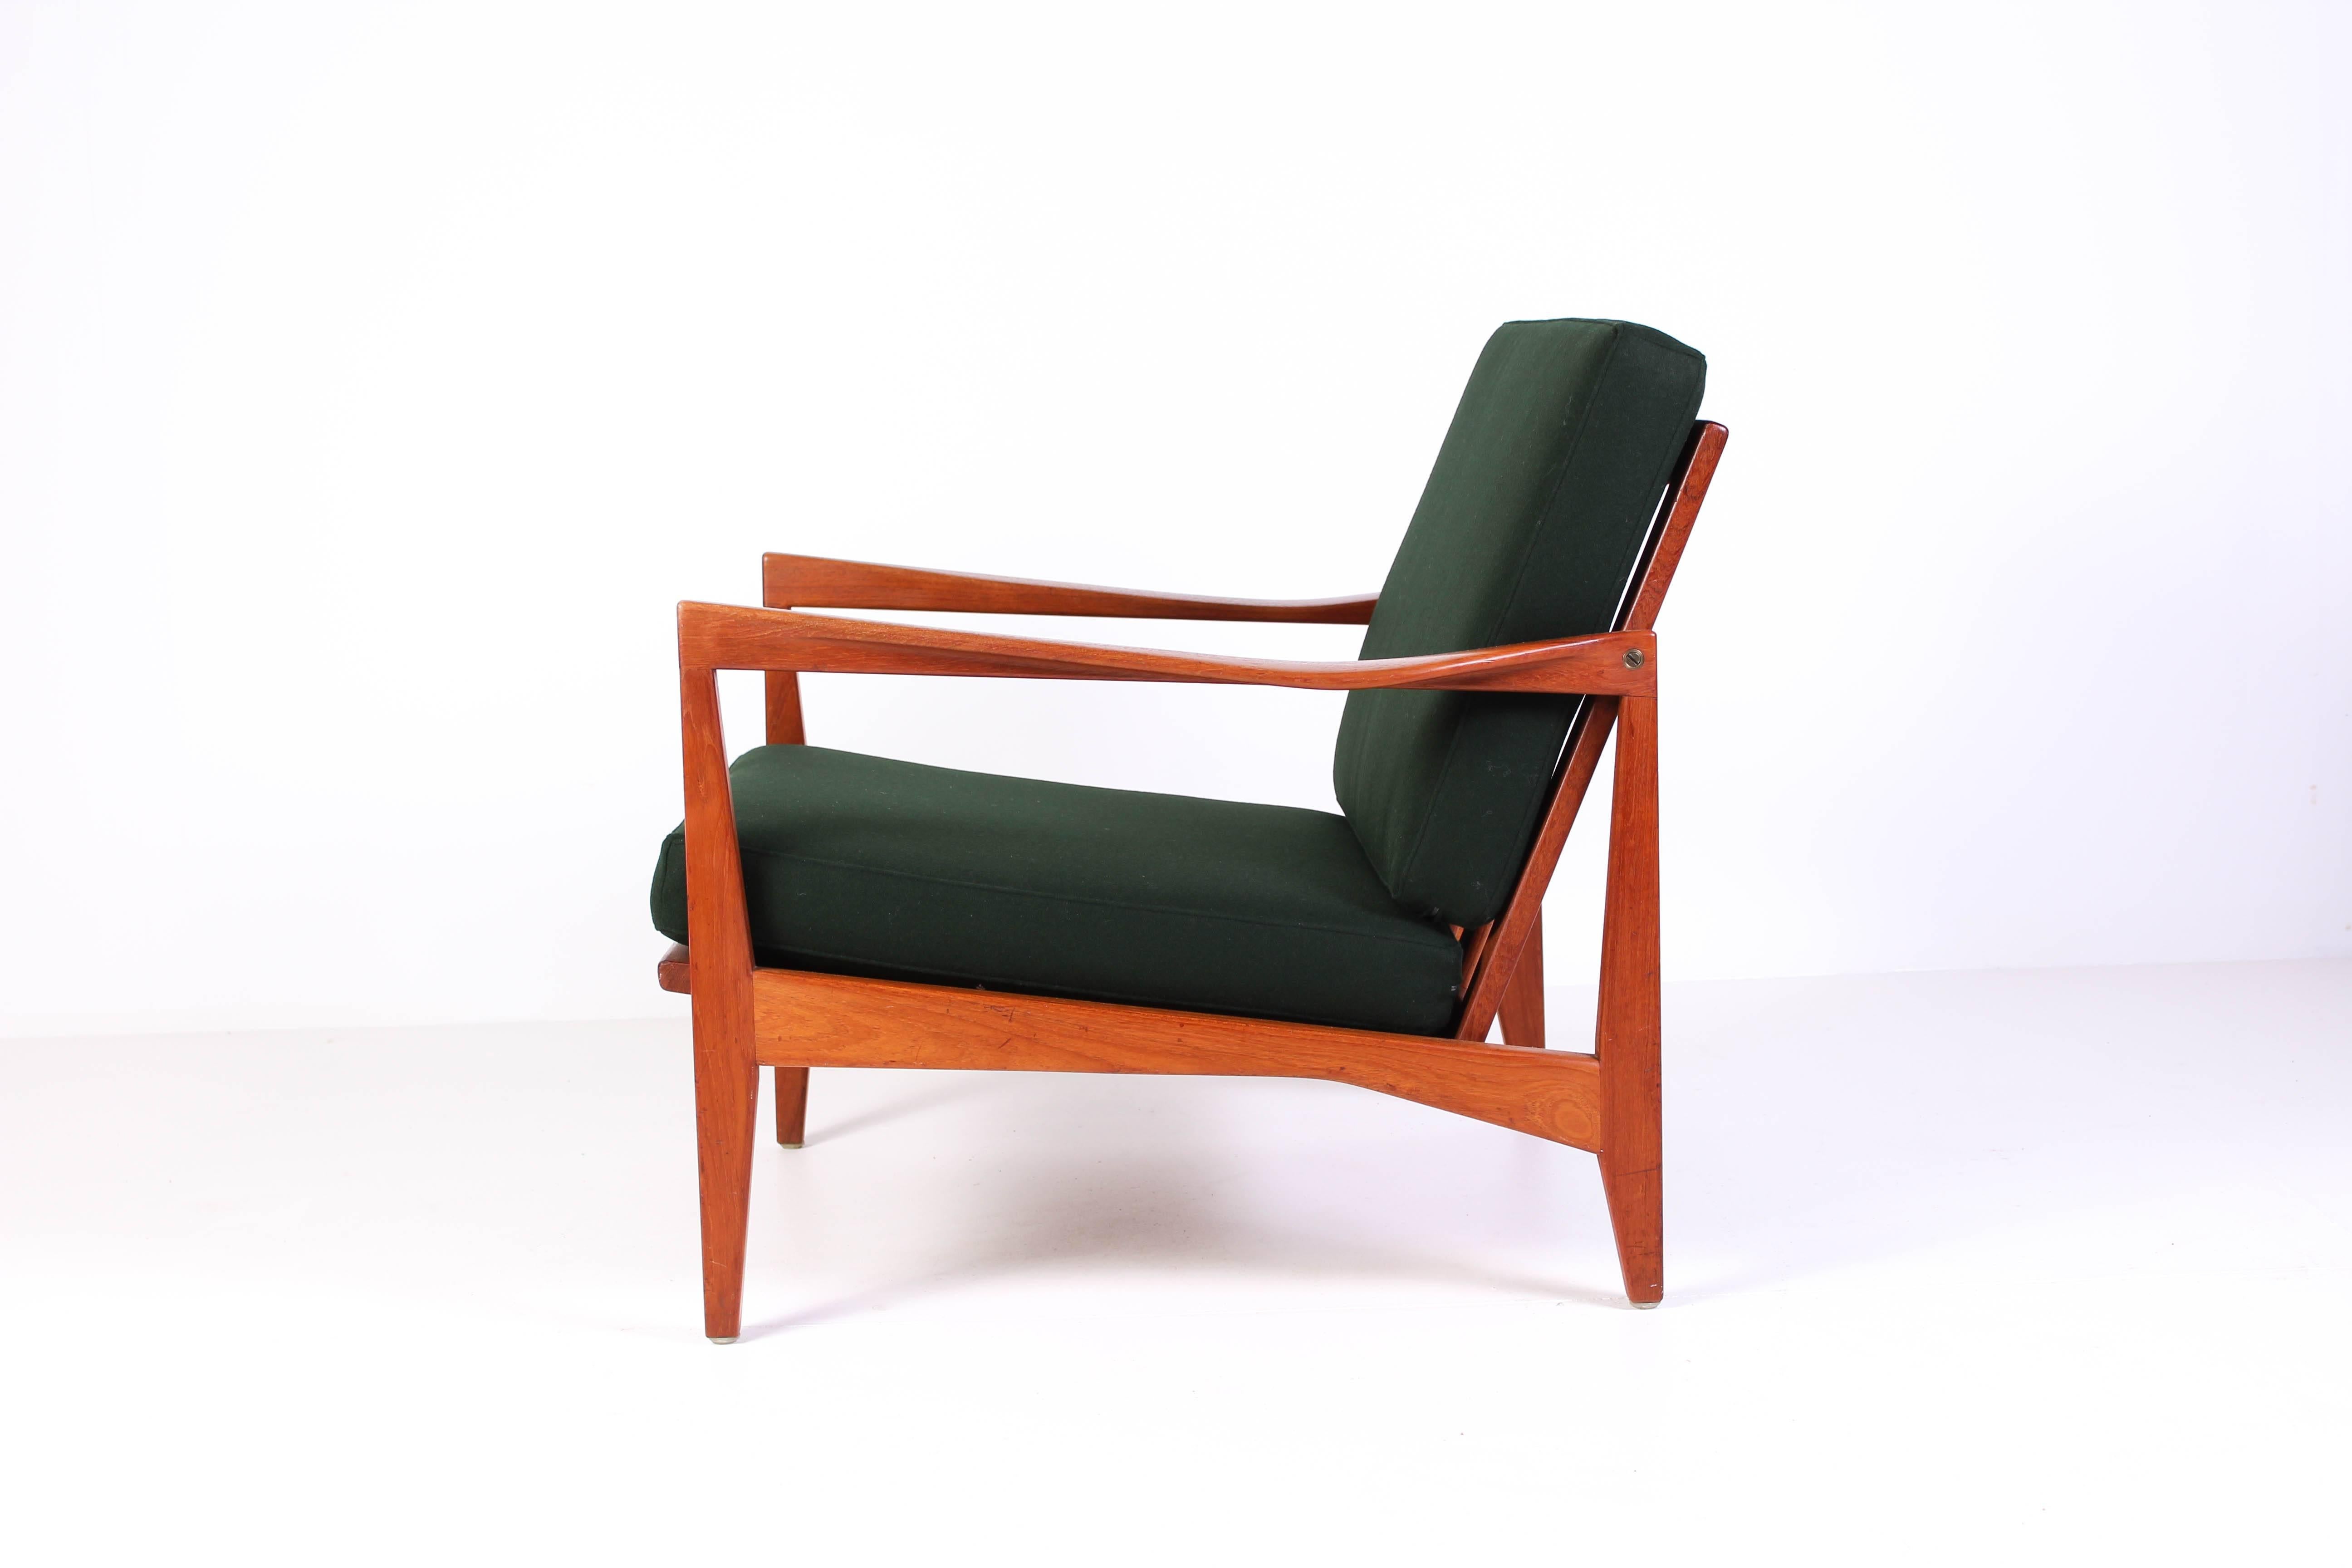 Midcentury teak easy chair by Swedish designer Svante Skogh. The chair has several nice details such as twisted armrests, brass fittings and sculptured back. New cushions upholstered with green 100% wool fabric by the Swedish producer Klippan